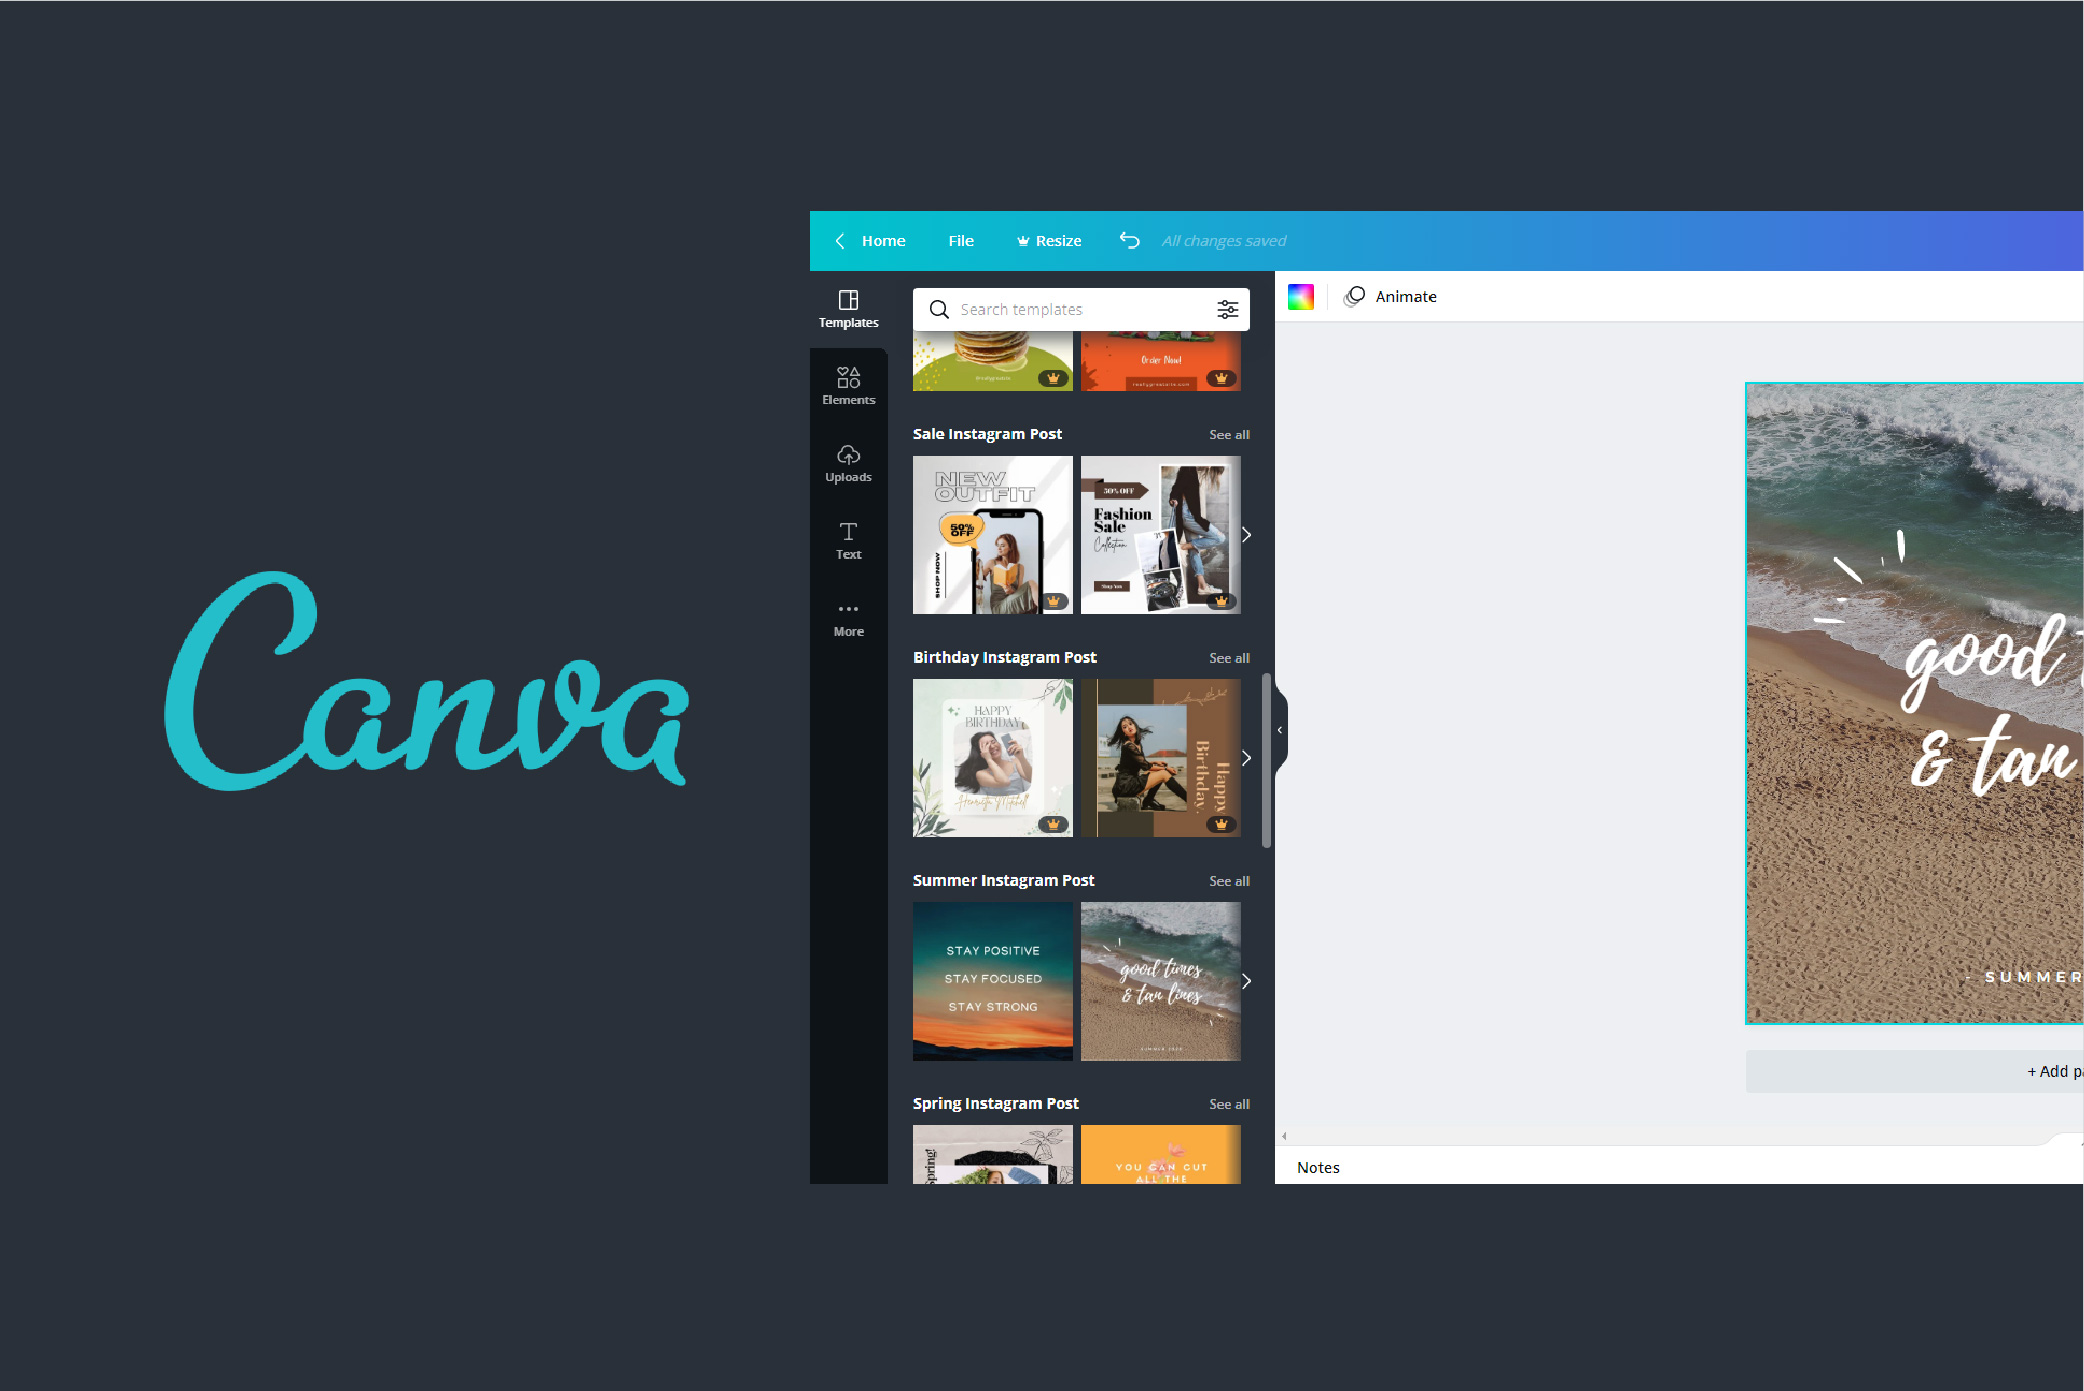 UI of Canva software